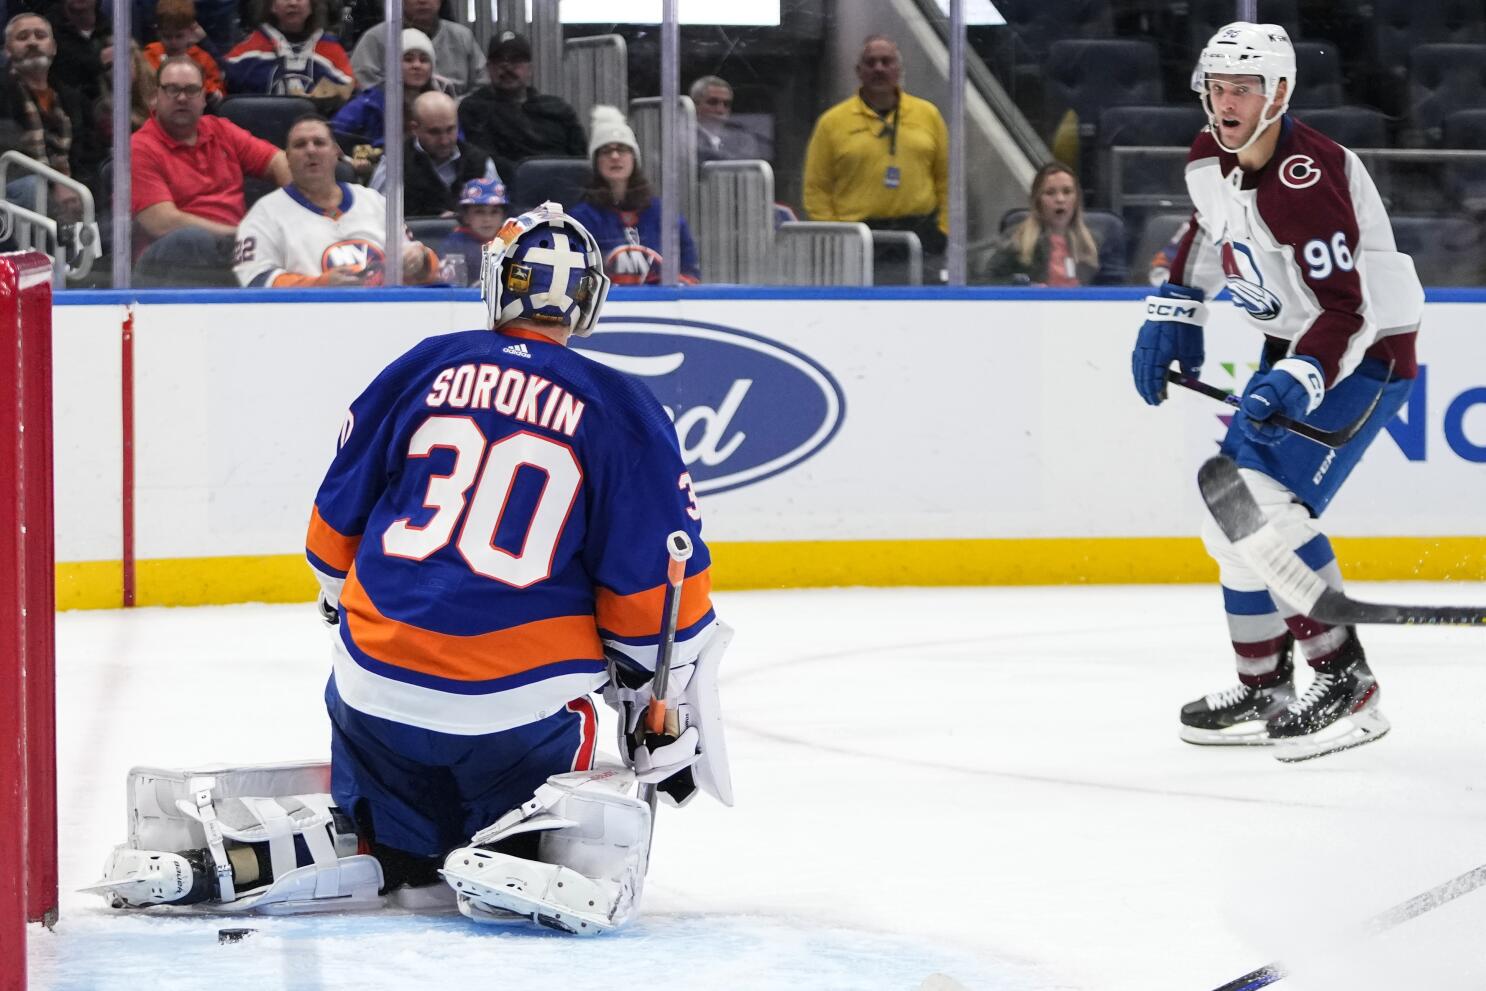 Islanders are the fifth oldest team in the NHL